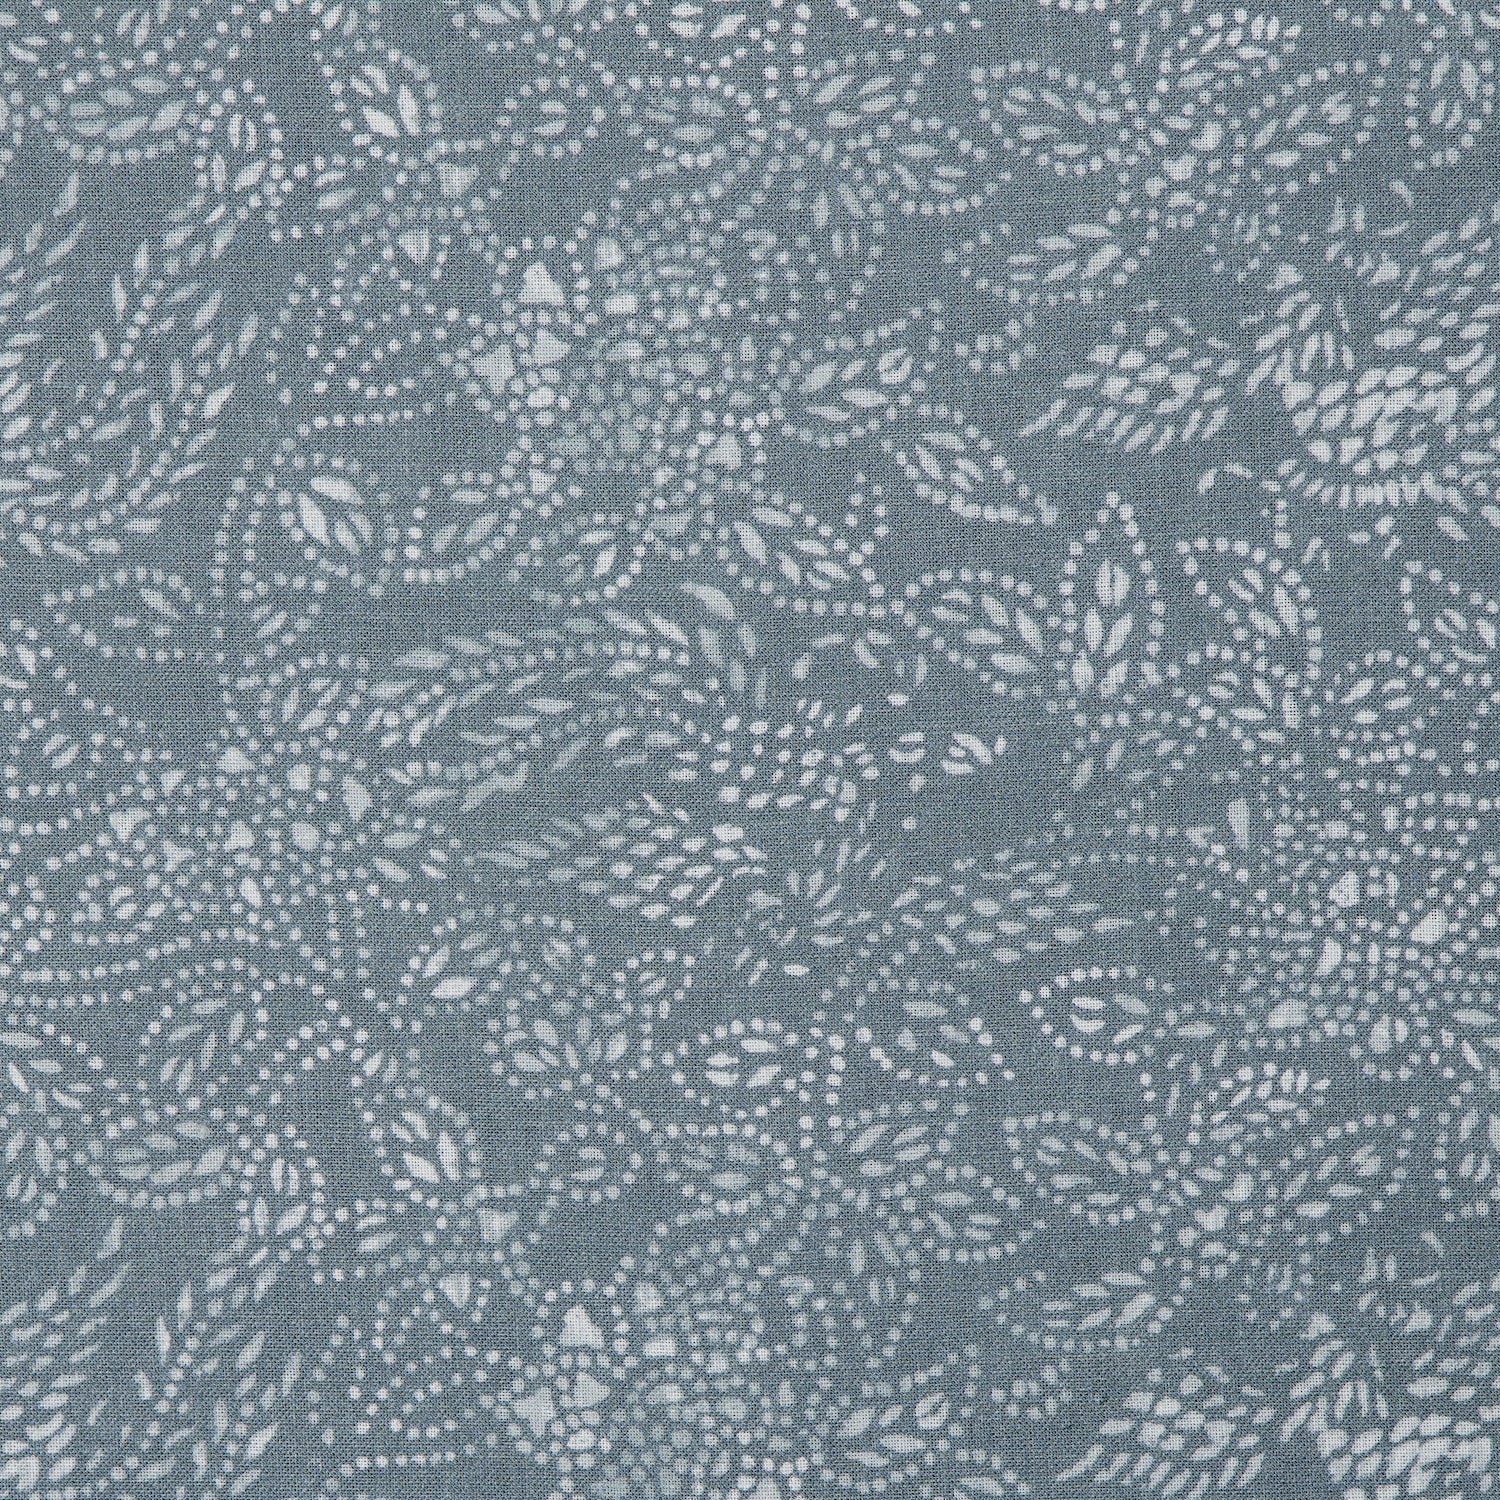 Detail of a linen fabric in a dotted leaf pattern in white on a dusty blue field.